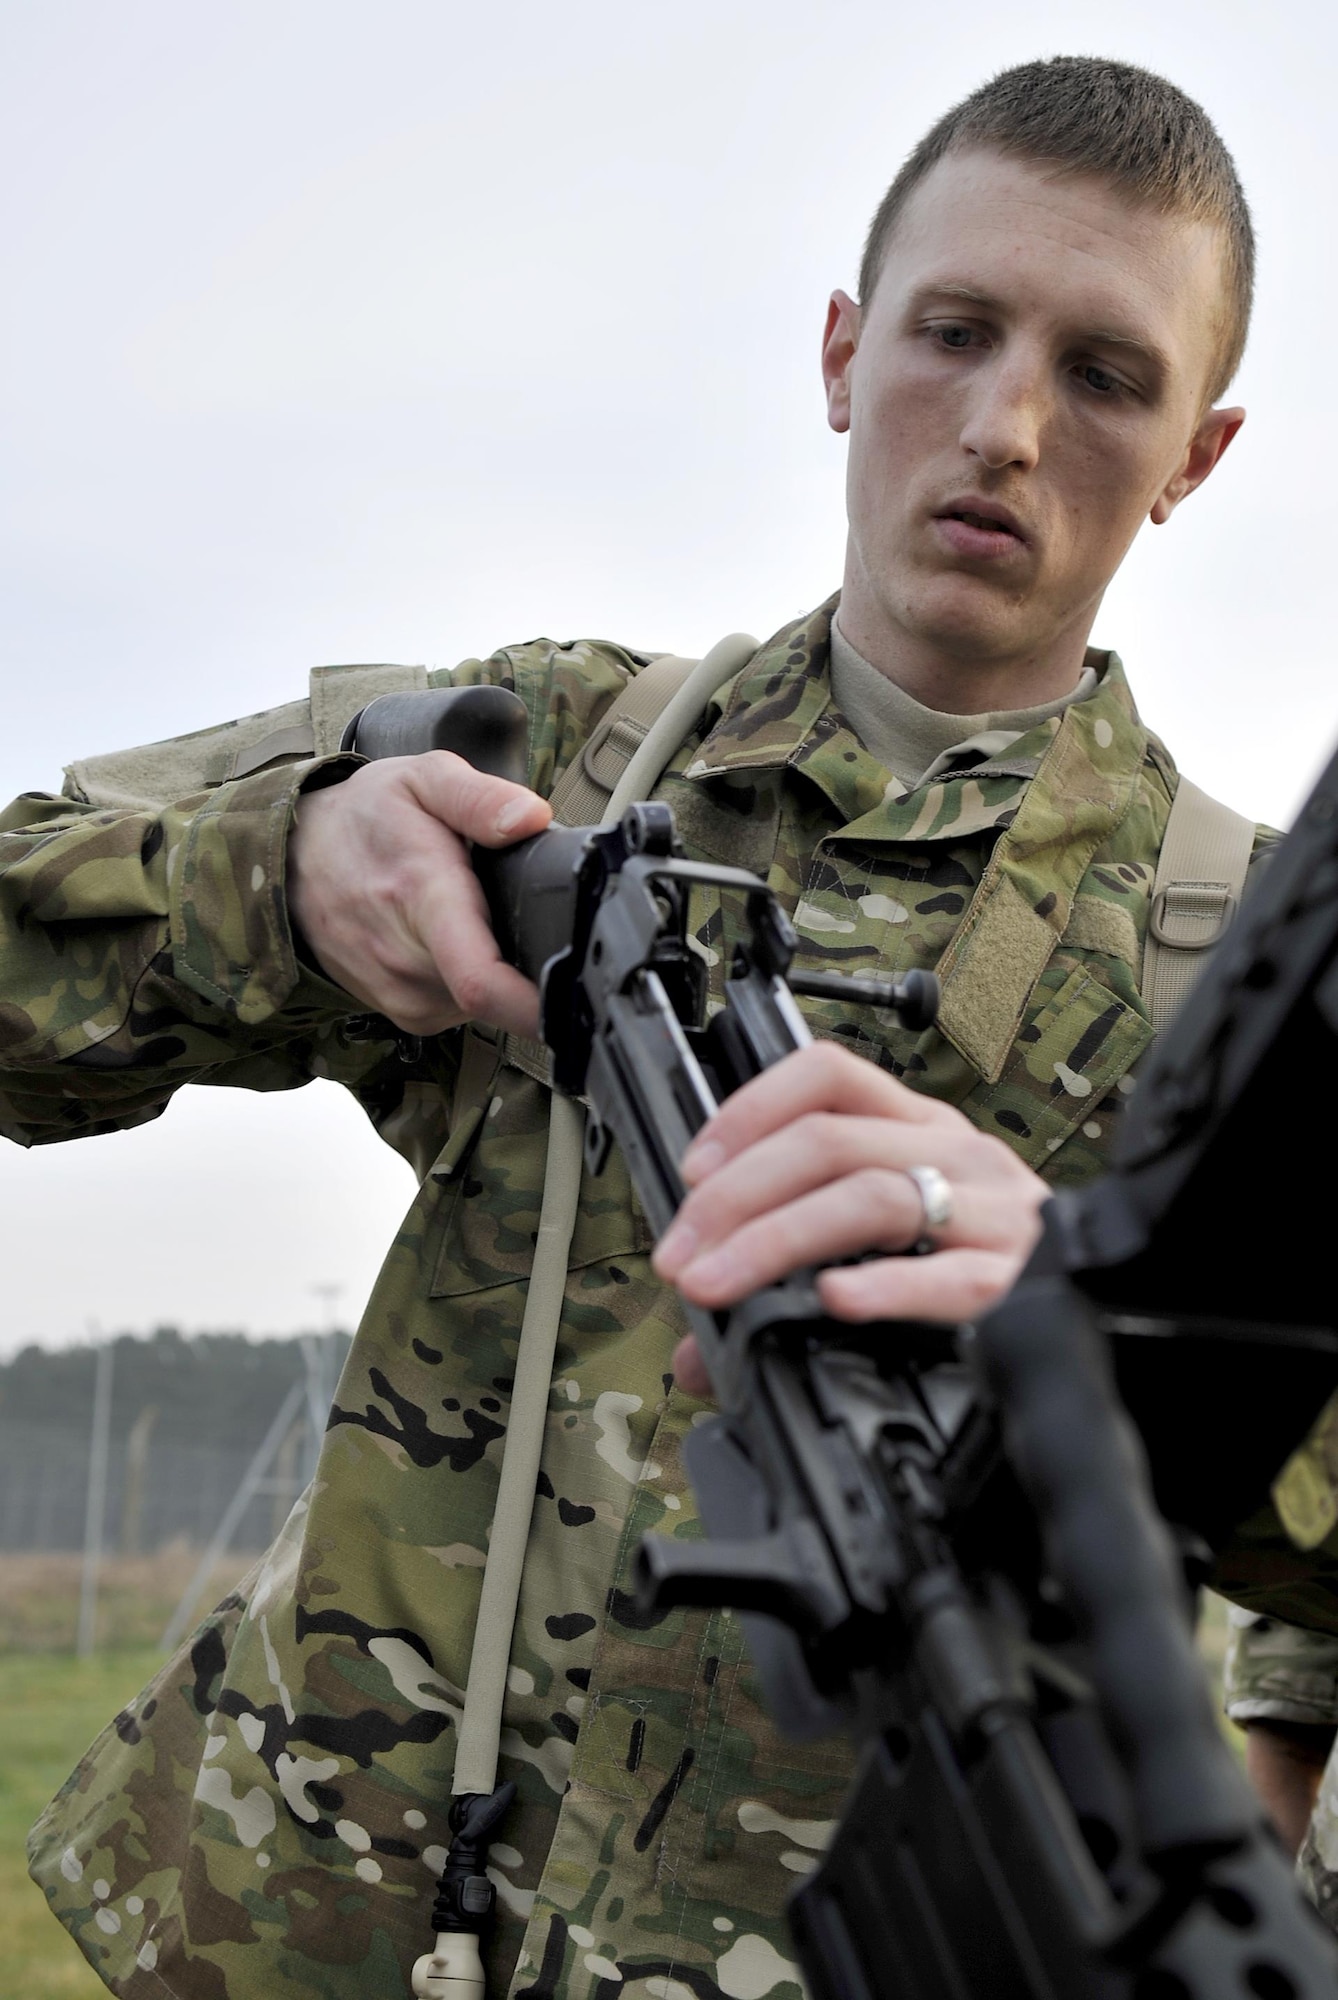 An Air Commando from the 321st Special Tactics Squadron participates in a weapons assembly challenge during the Monster Mash April 10, 2015 on RAF Mildenhall, England. A Monster Mash is a long-standing special tactics tradition which combines event designed to test strength, stamina and teamwork skills. (U.S. Air Force photo by Airman 1st Class Kyla Gifford)